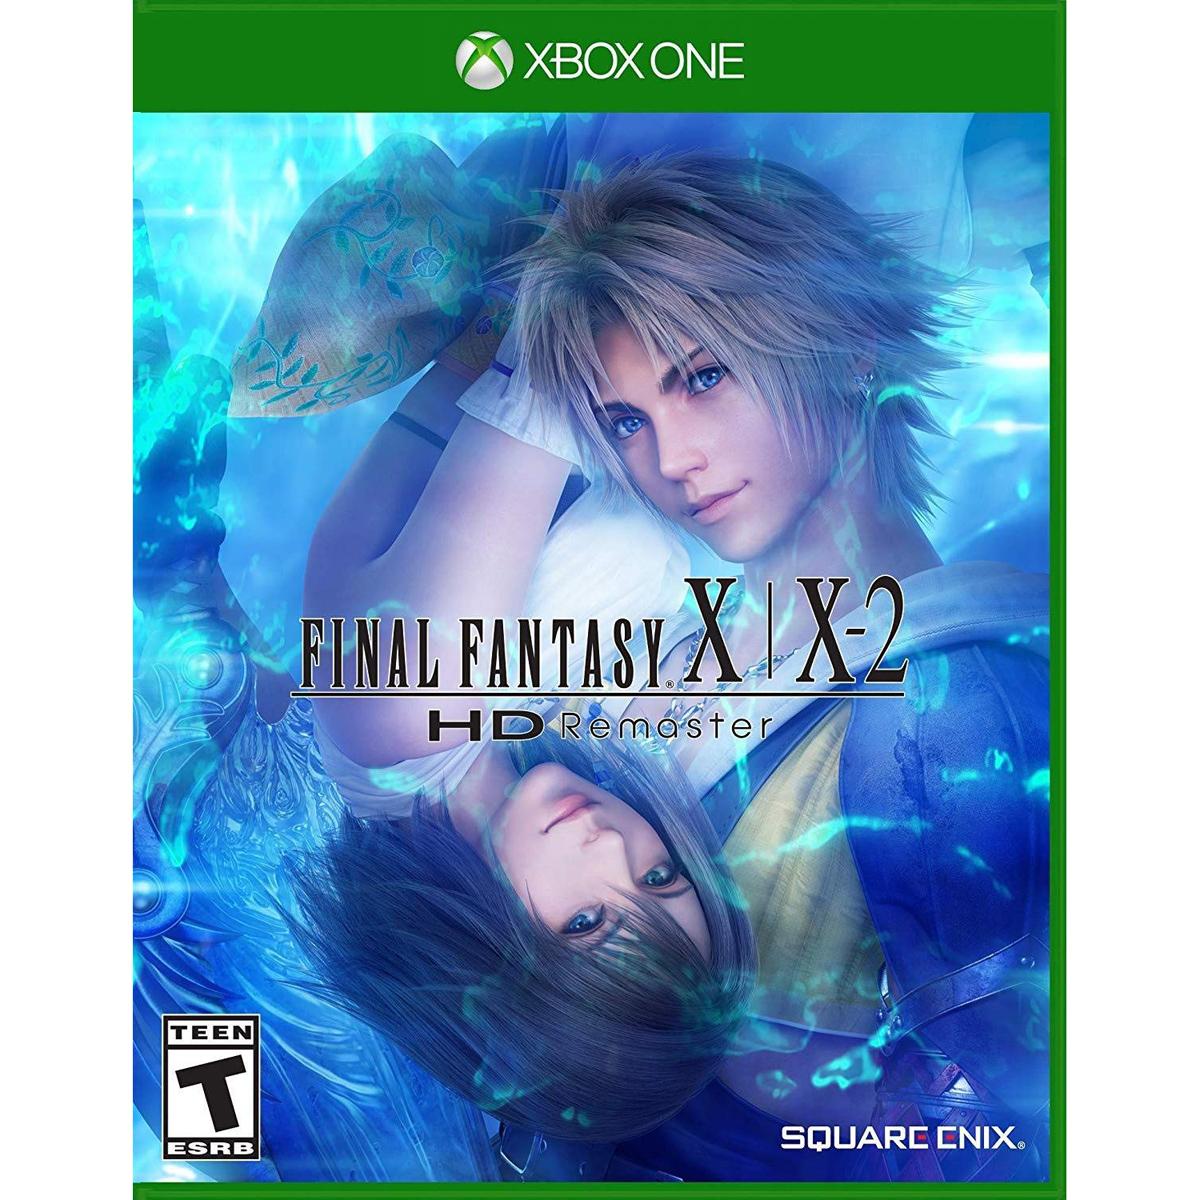 Final Fantasy X X-2 HD Remaster Xbox One for $19.99